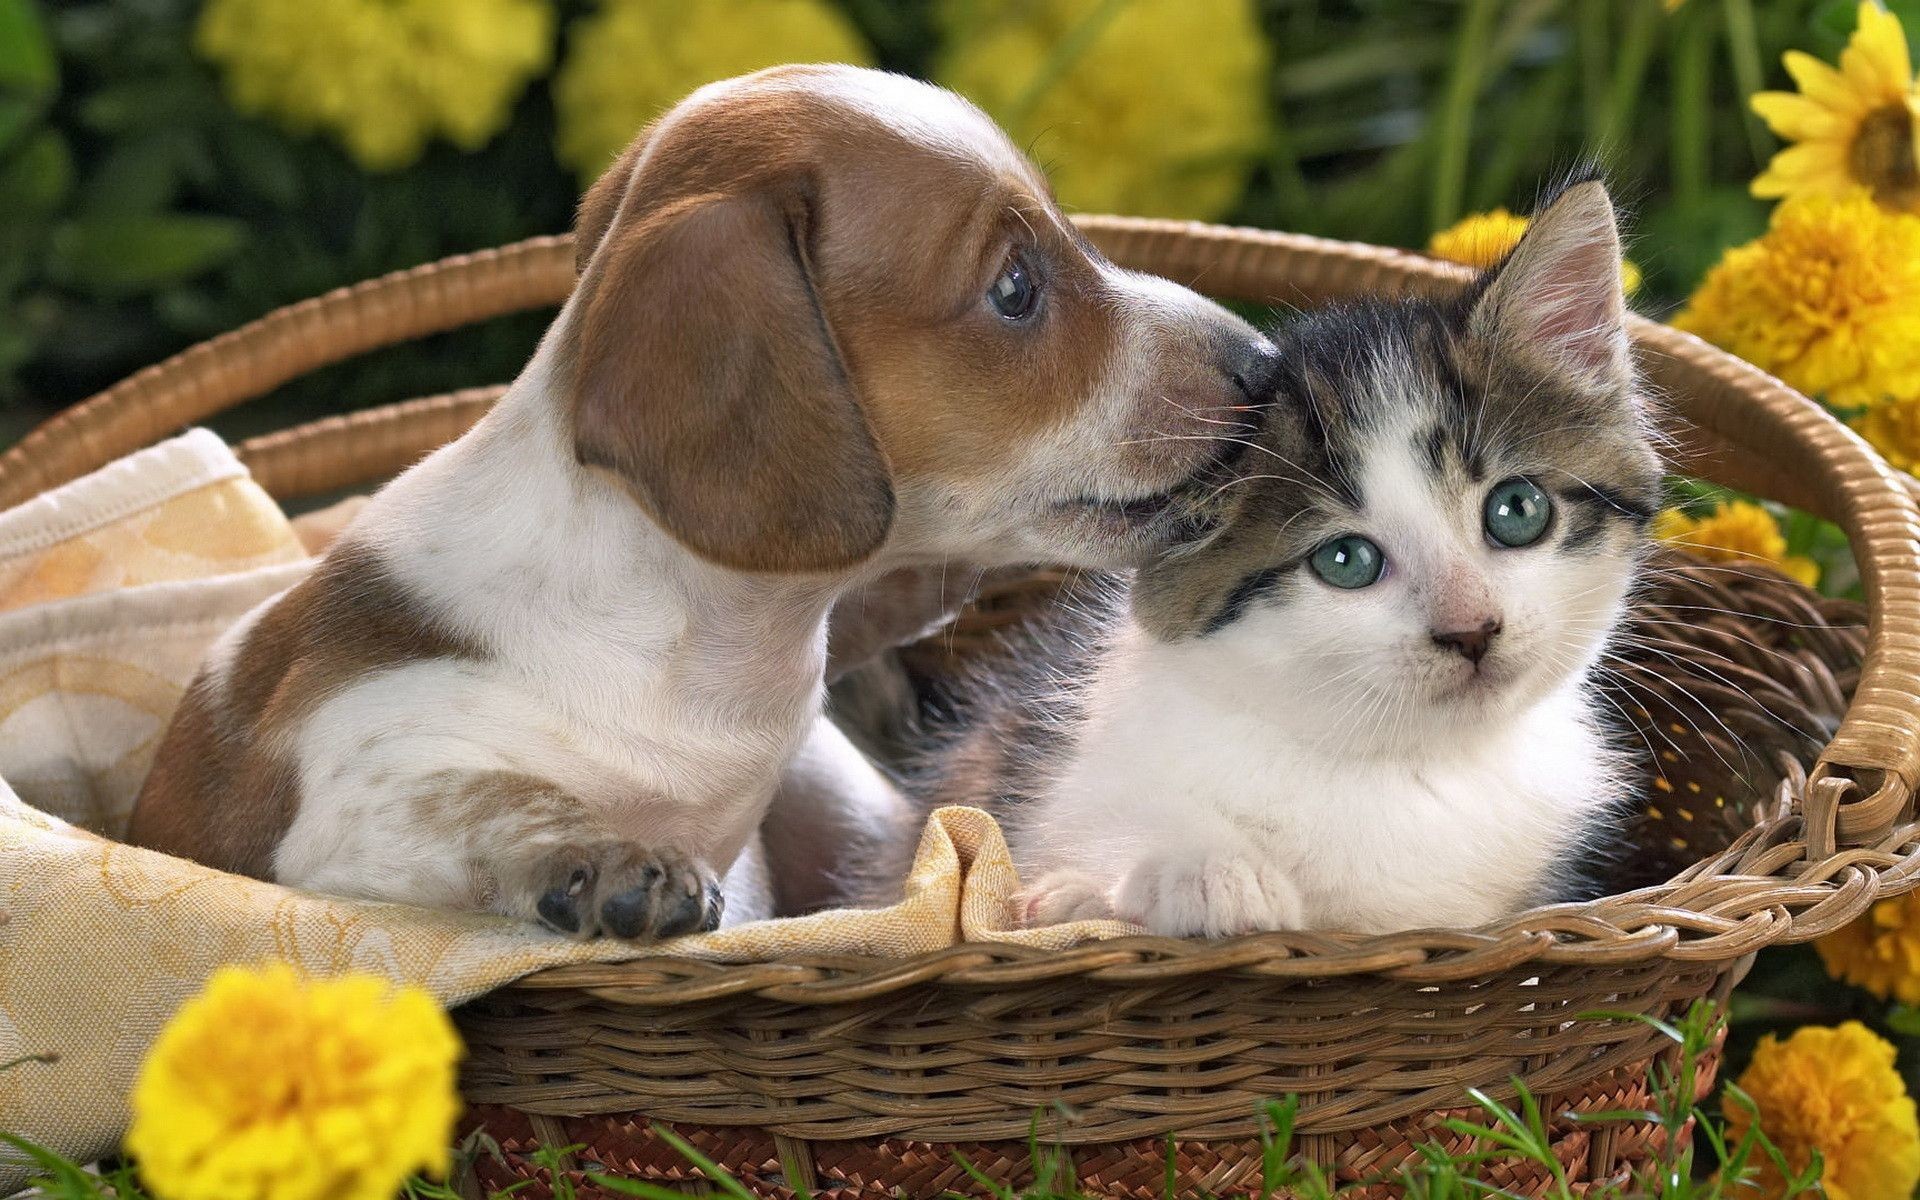 Explore Kittens And Puppies, Cats And Kittens, and more